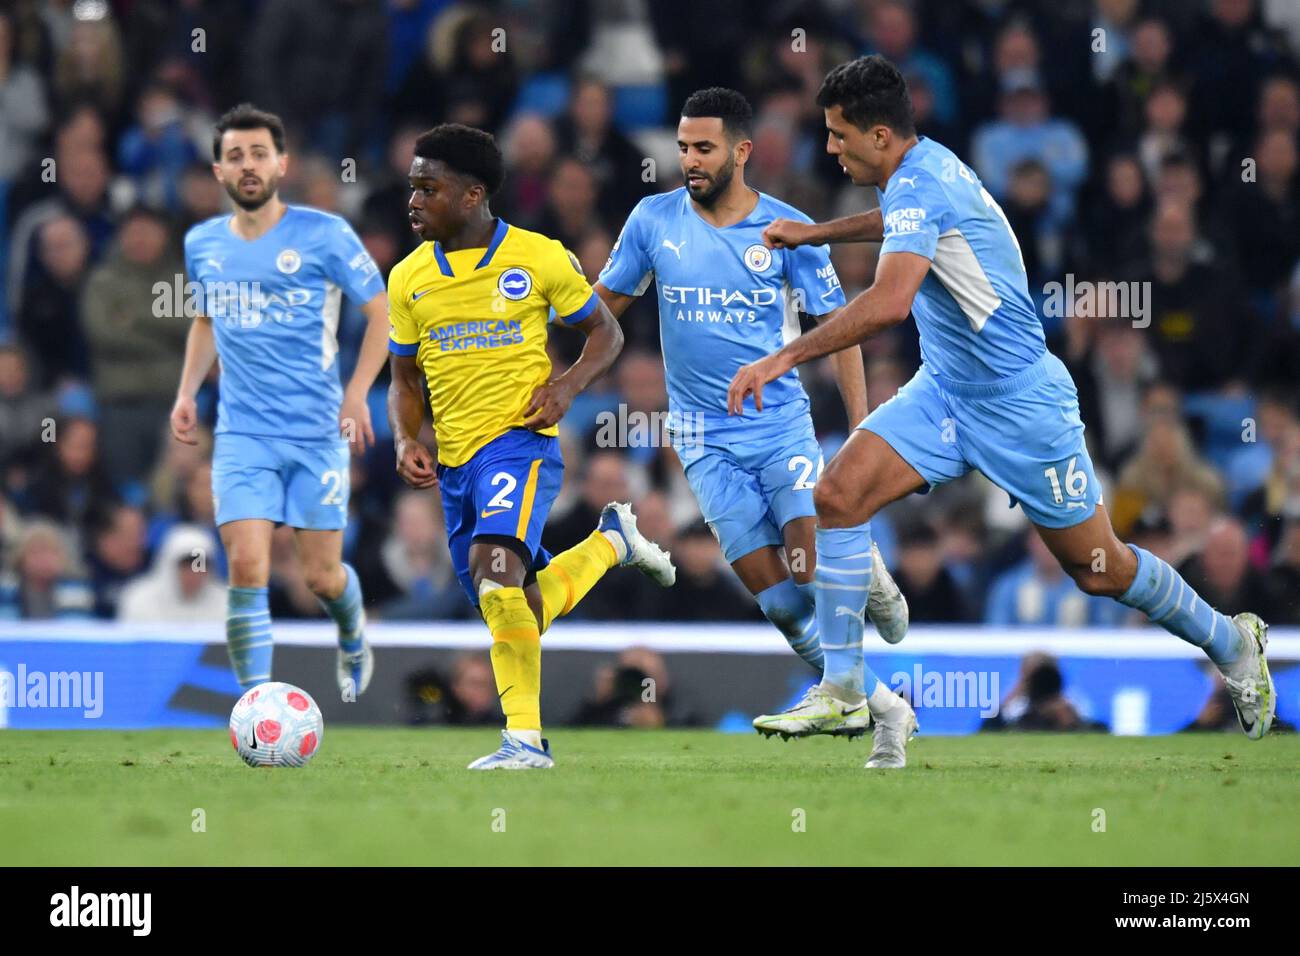 Brighton and Hove Albion's Tariq Lamptey. Picture date: Thursday April 21, 2022. Photo credit should read:   Anthony Devlin/Alamy Live News/Alamy Live News Stock Photo